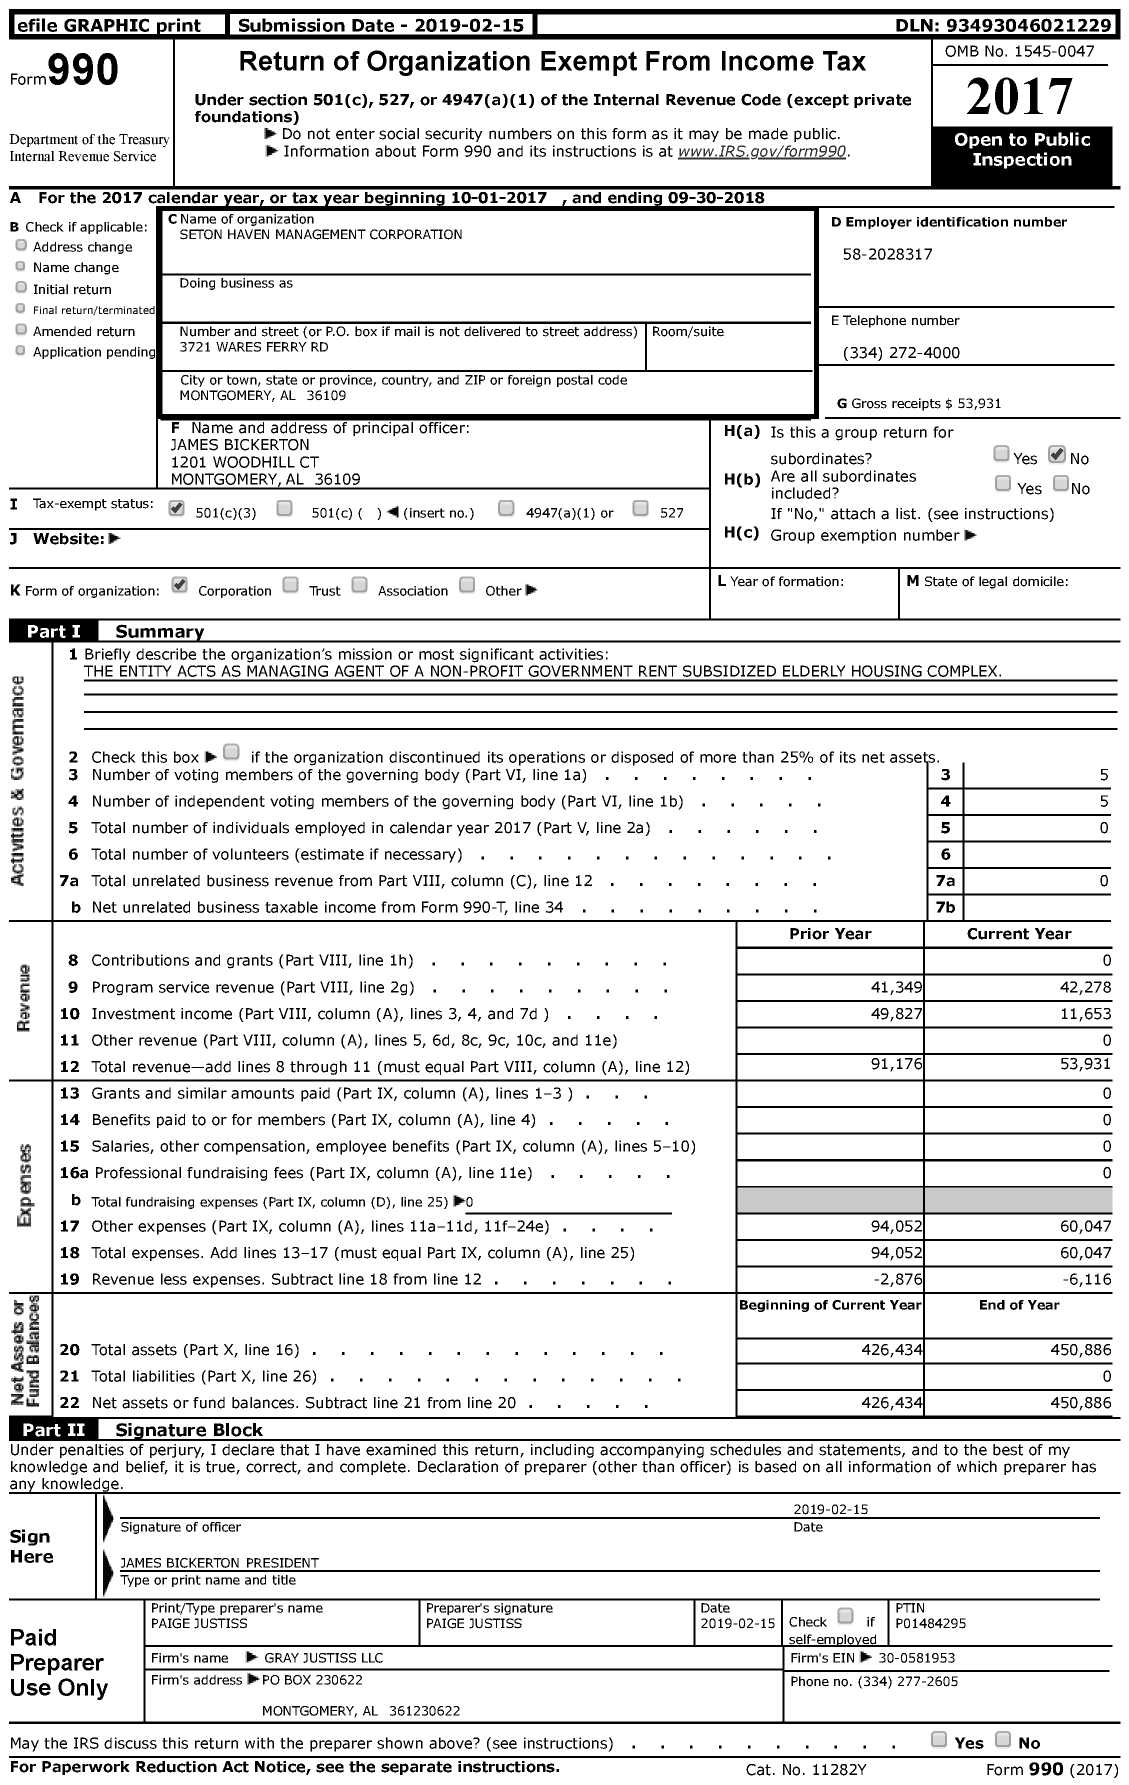 Image of first page of 2017 Form 990 for Seton Haven Management Corporation